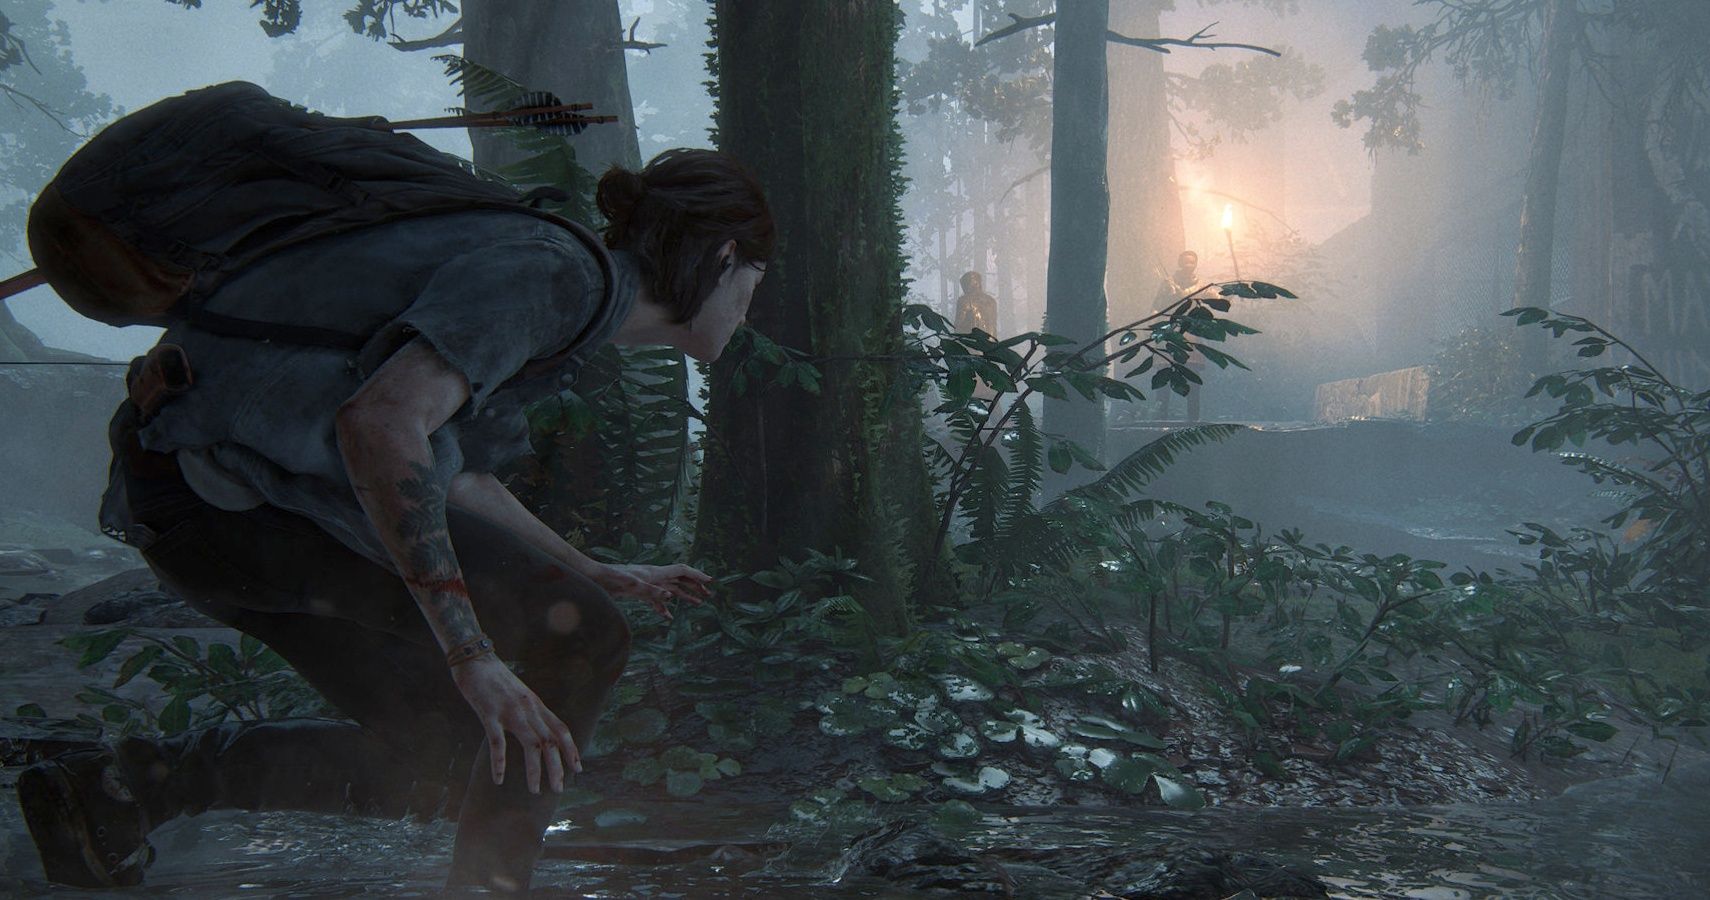 Why are people disappointed with The Last of Us Part II? (Spoilers)